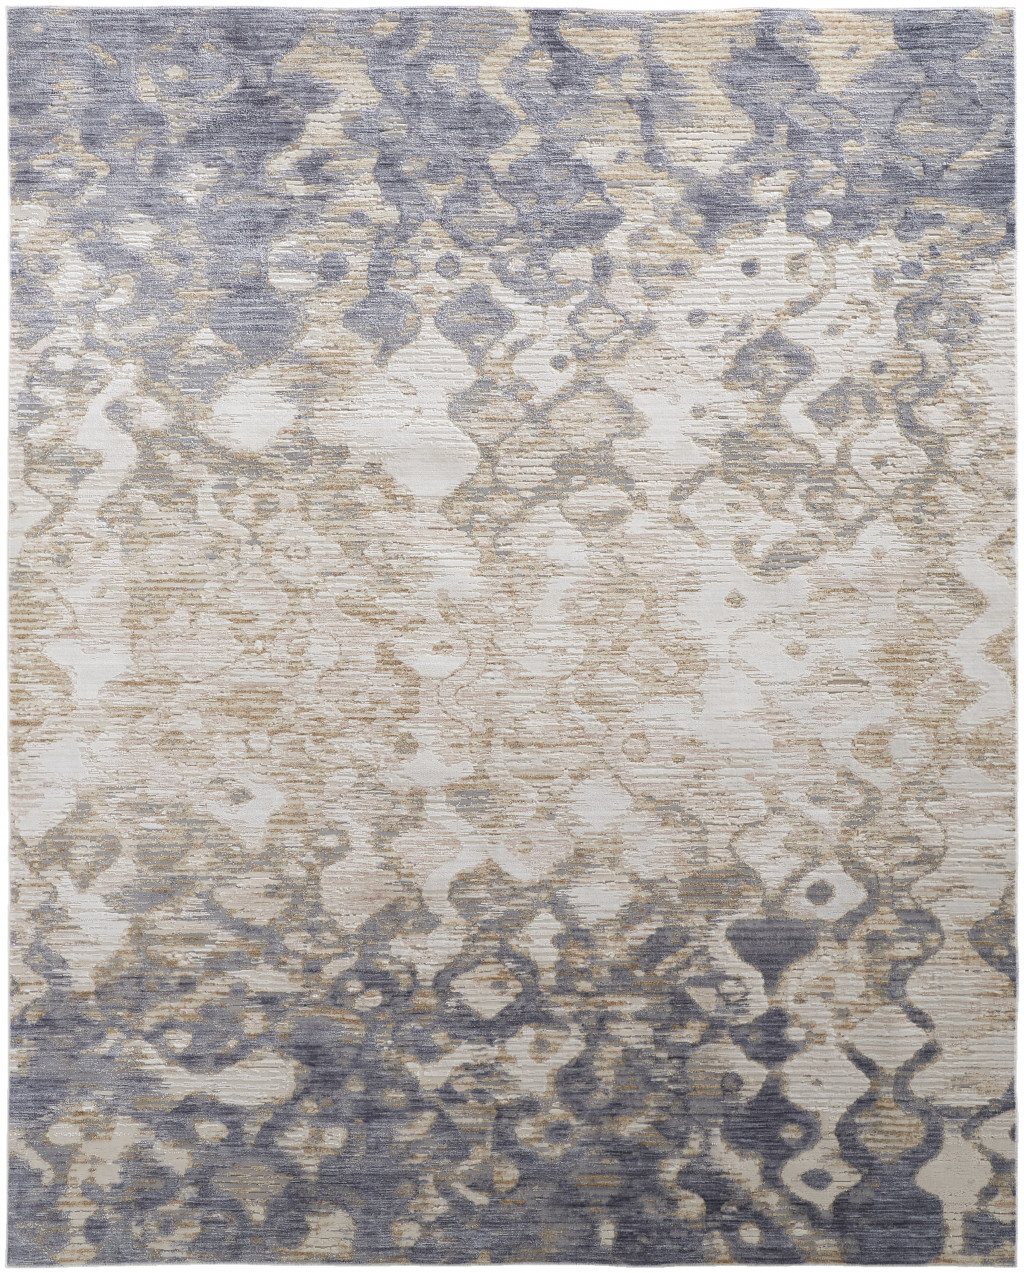 12' X 15' Tan Ivory And Blue Abstract Power Loom Distressed Area Rug-514165-1